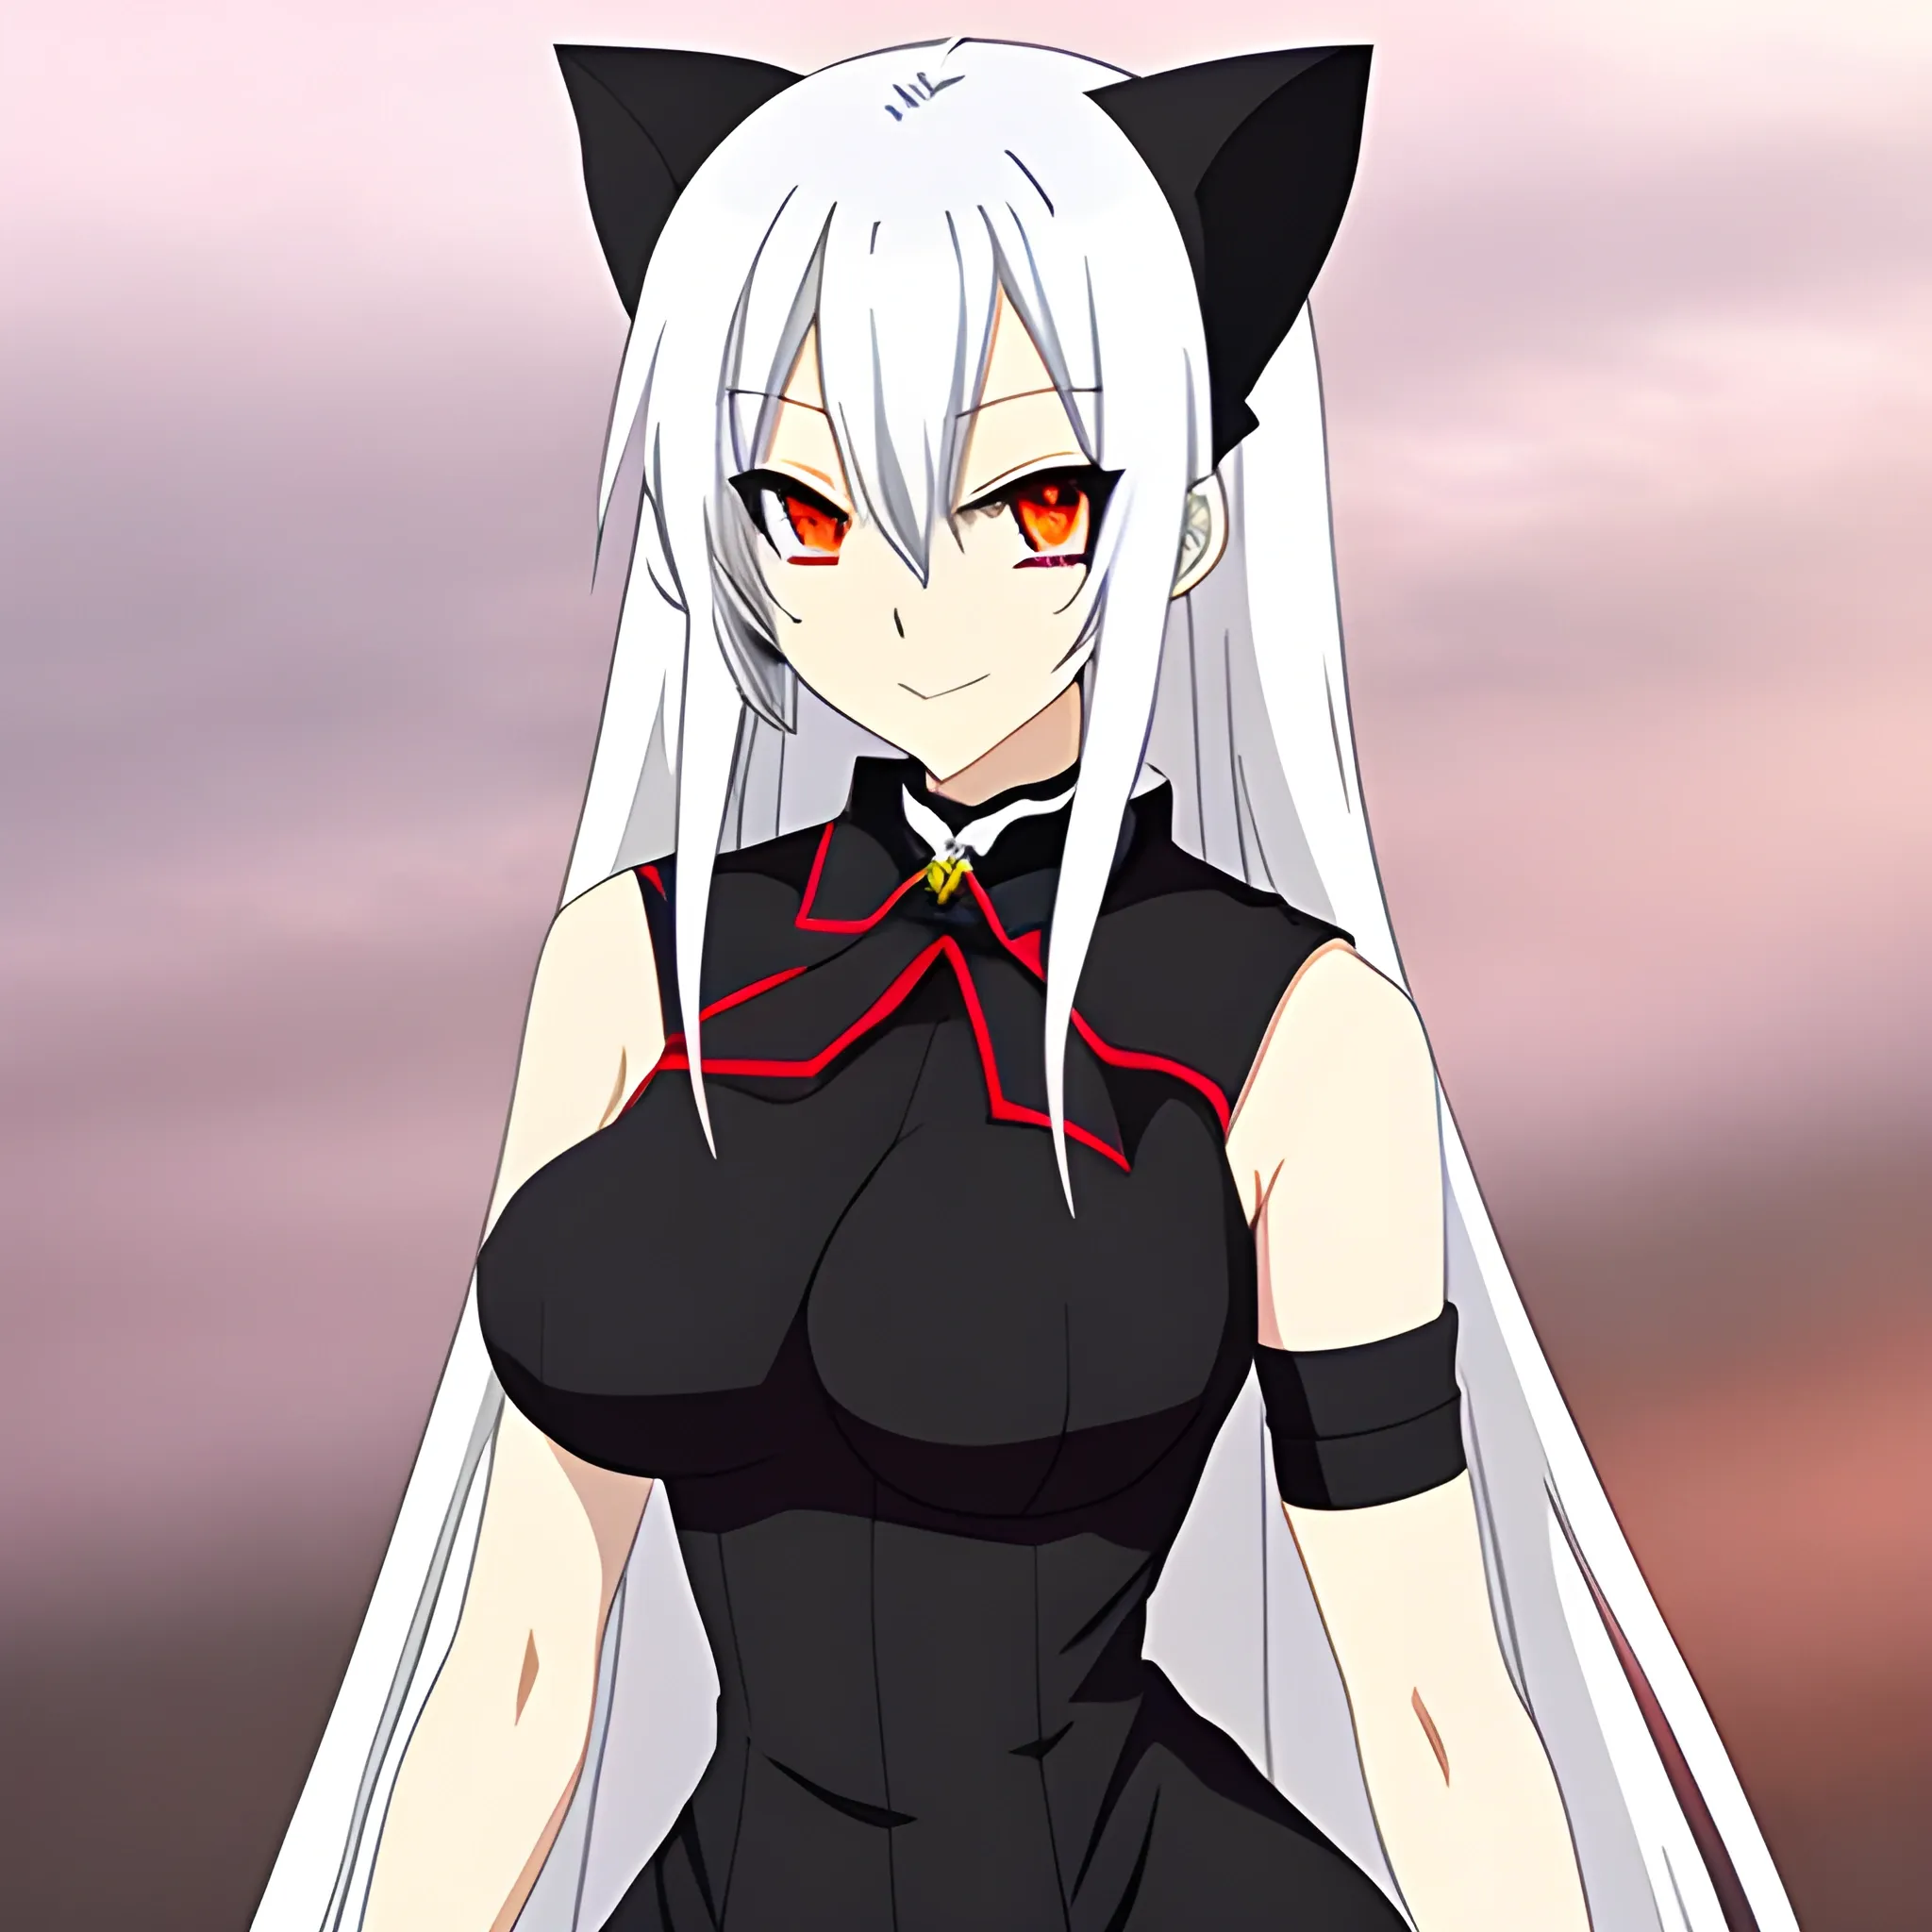 An anime cat girl with long white hair, red eyes, and a black collar. Wearing an elegant white dress.